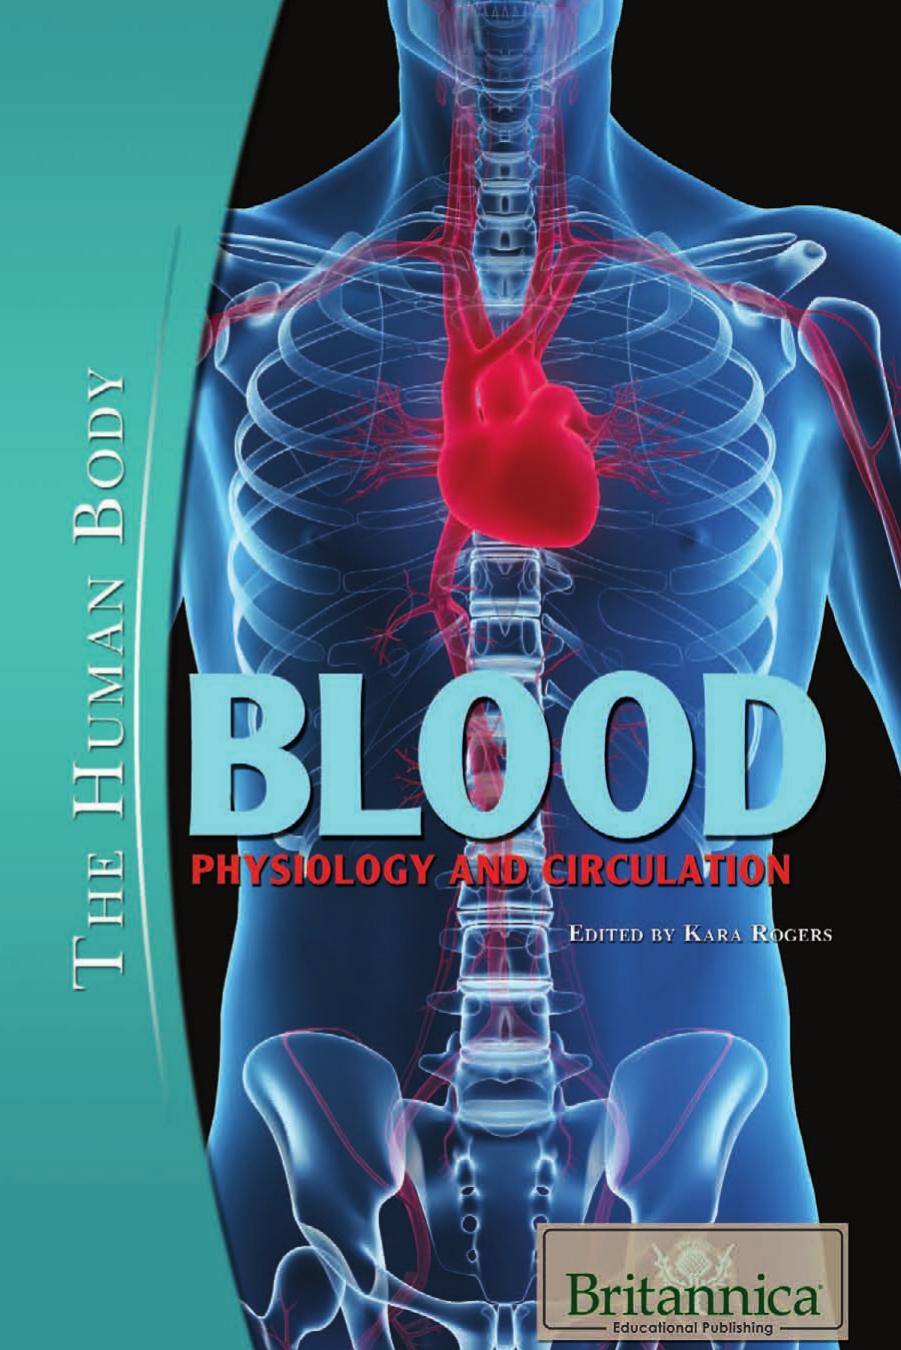 Blood: Physiology and Circulation